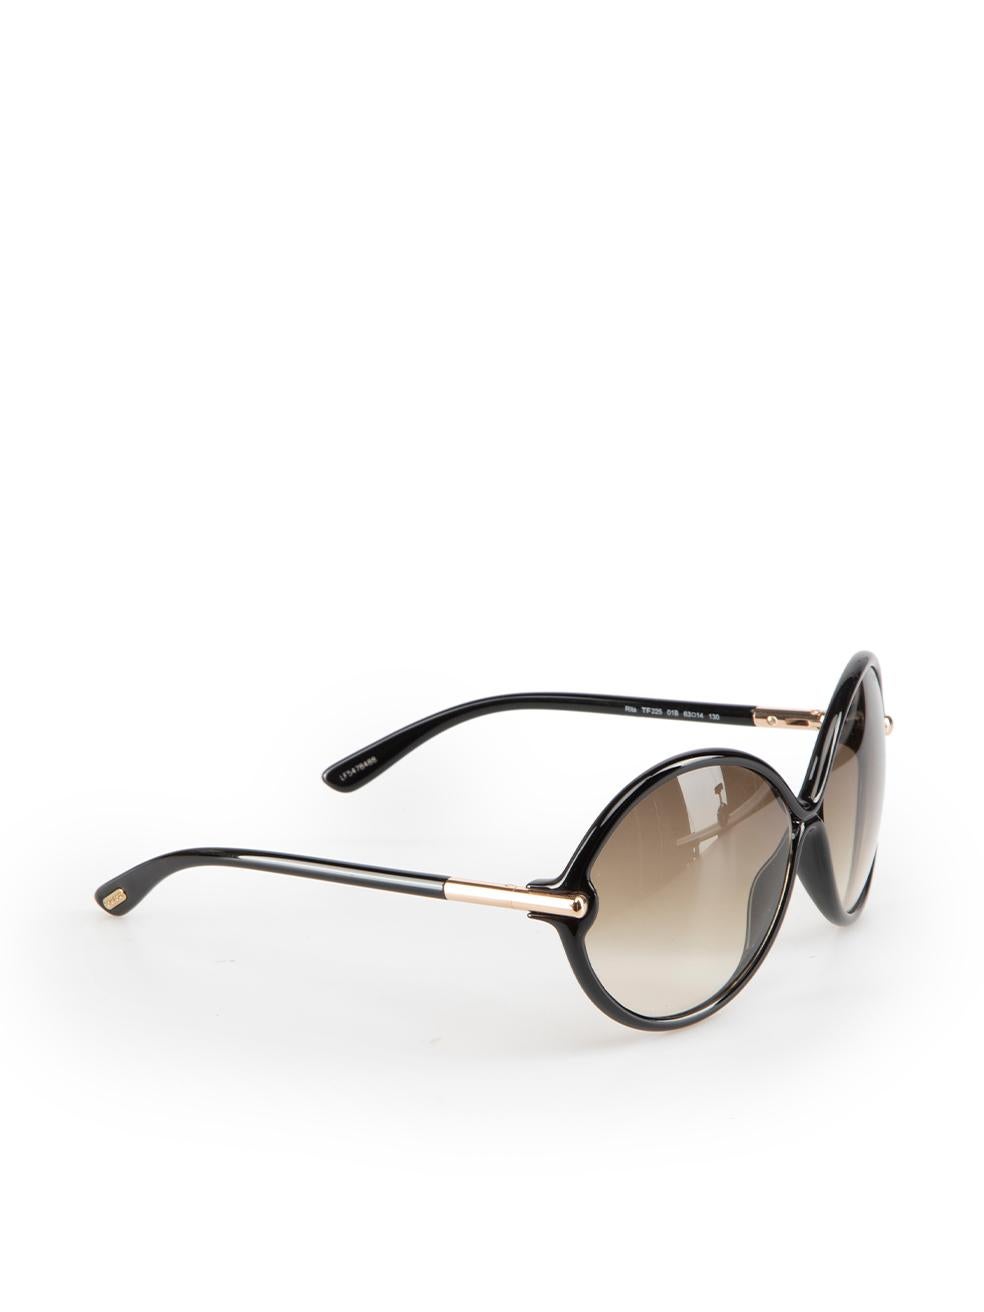 CONDITION is Very good. Hardly any visible wear to sunglasses is evident on this used Tom Ford designer resale item.

Details
Rita
Black
Plastic
Sunglasses
Round
Gradient lens
Oversized
 
Made in Italy 

Composition
EXTERIOR: Plastic

Size &